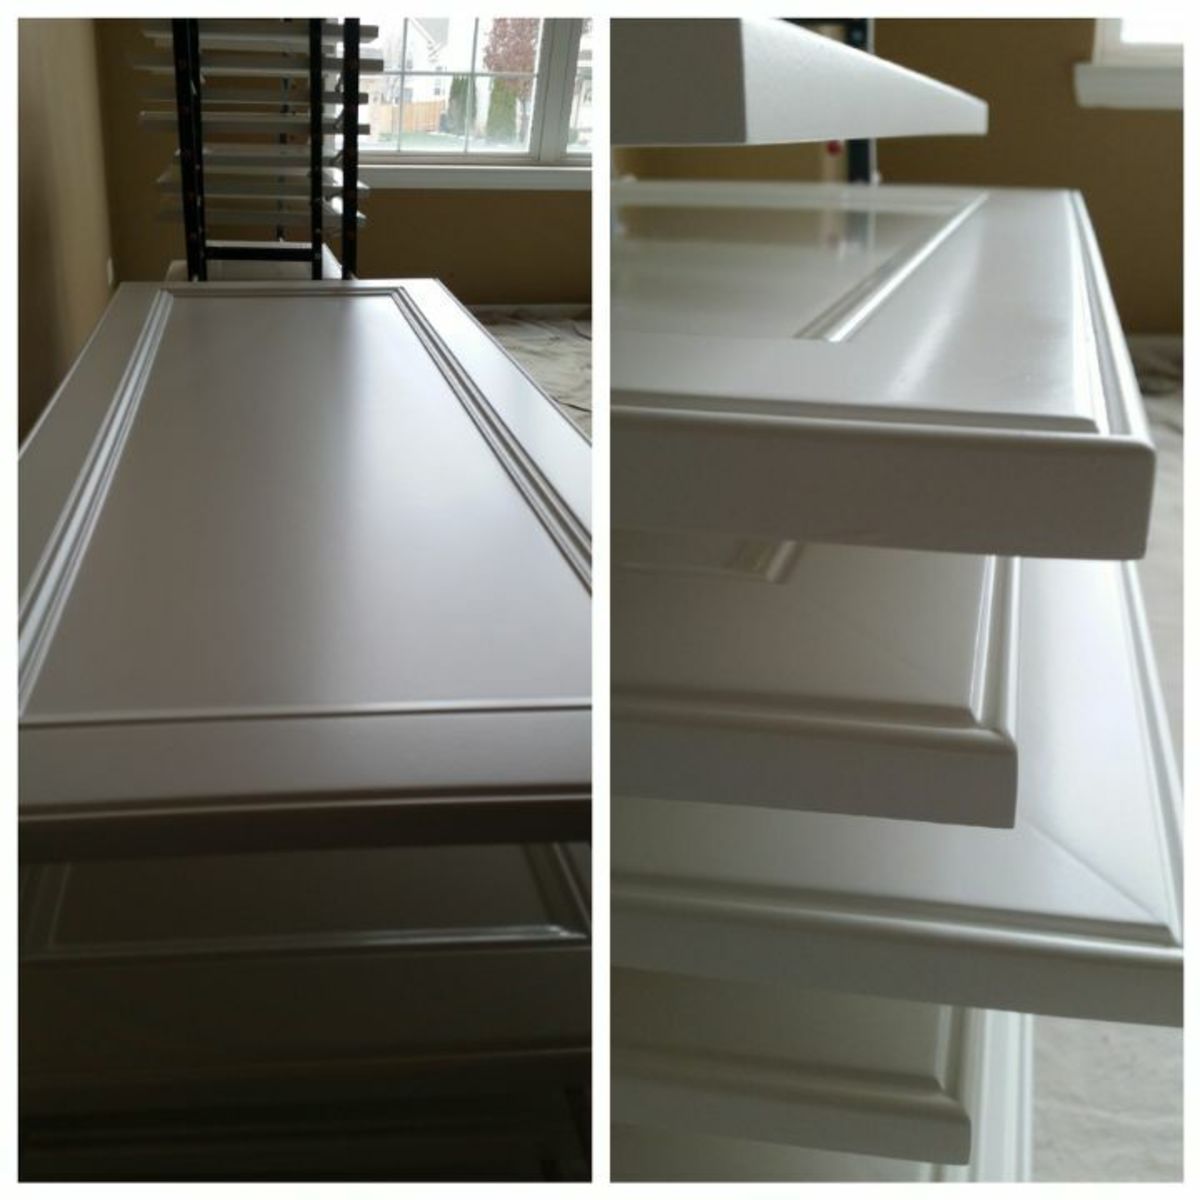 How to Get a Super Smooth Finish Painting Cabinet Doors